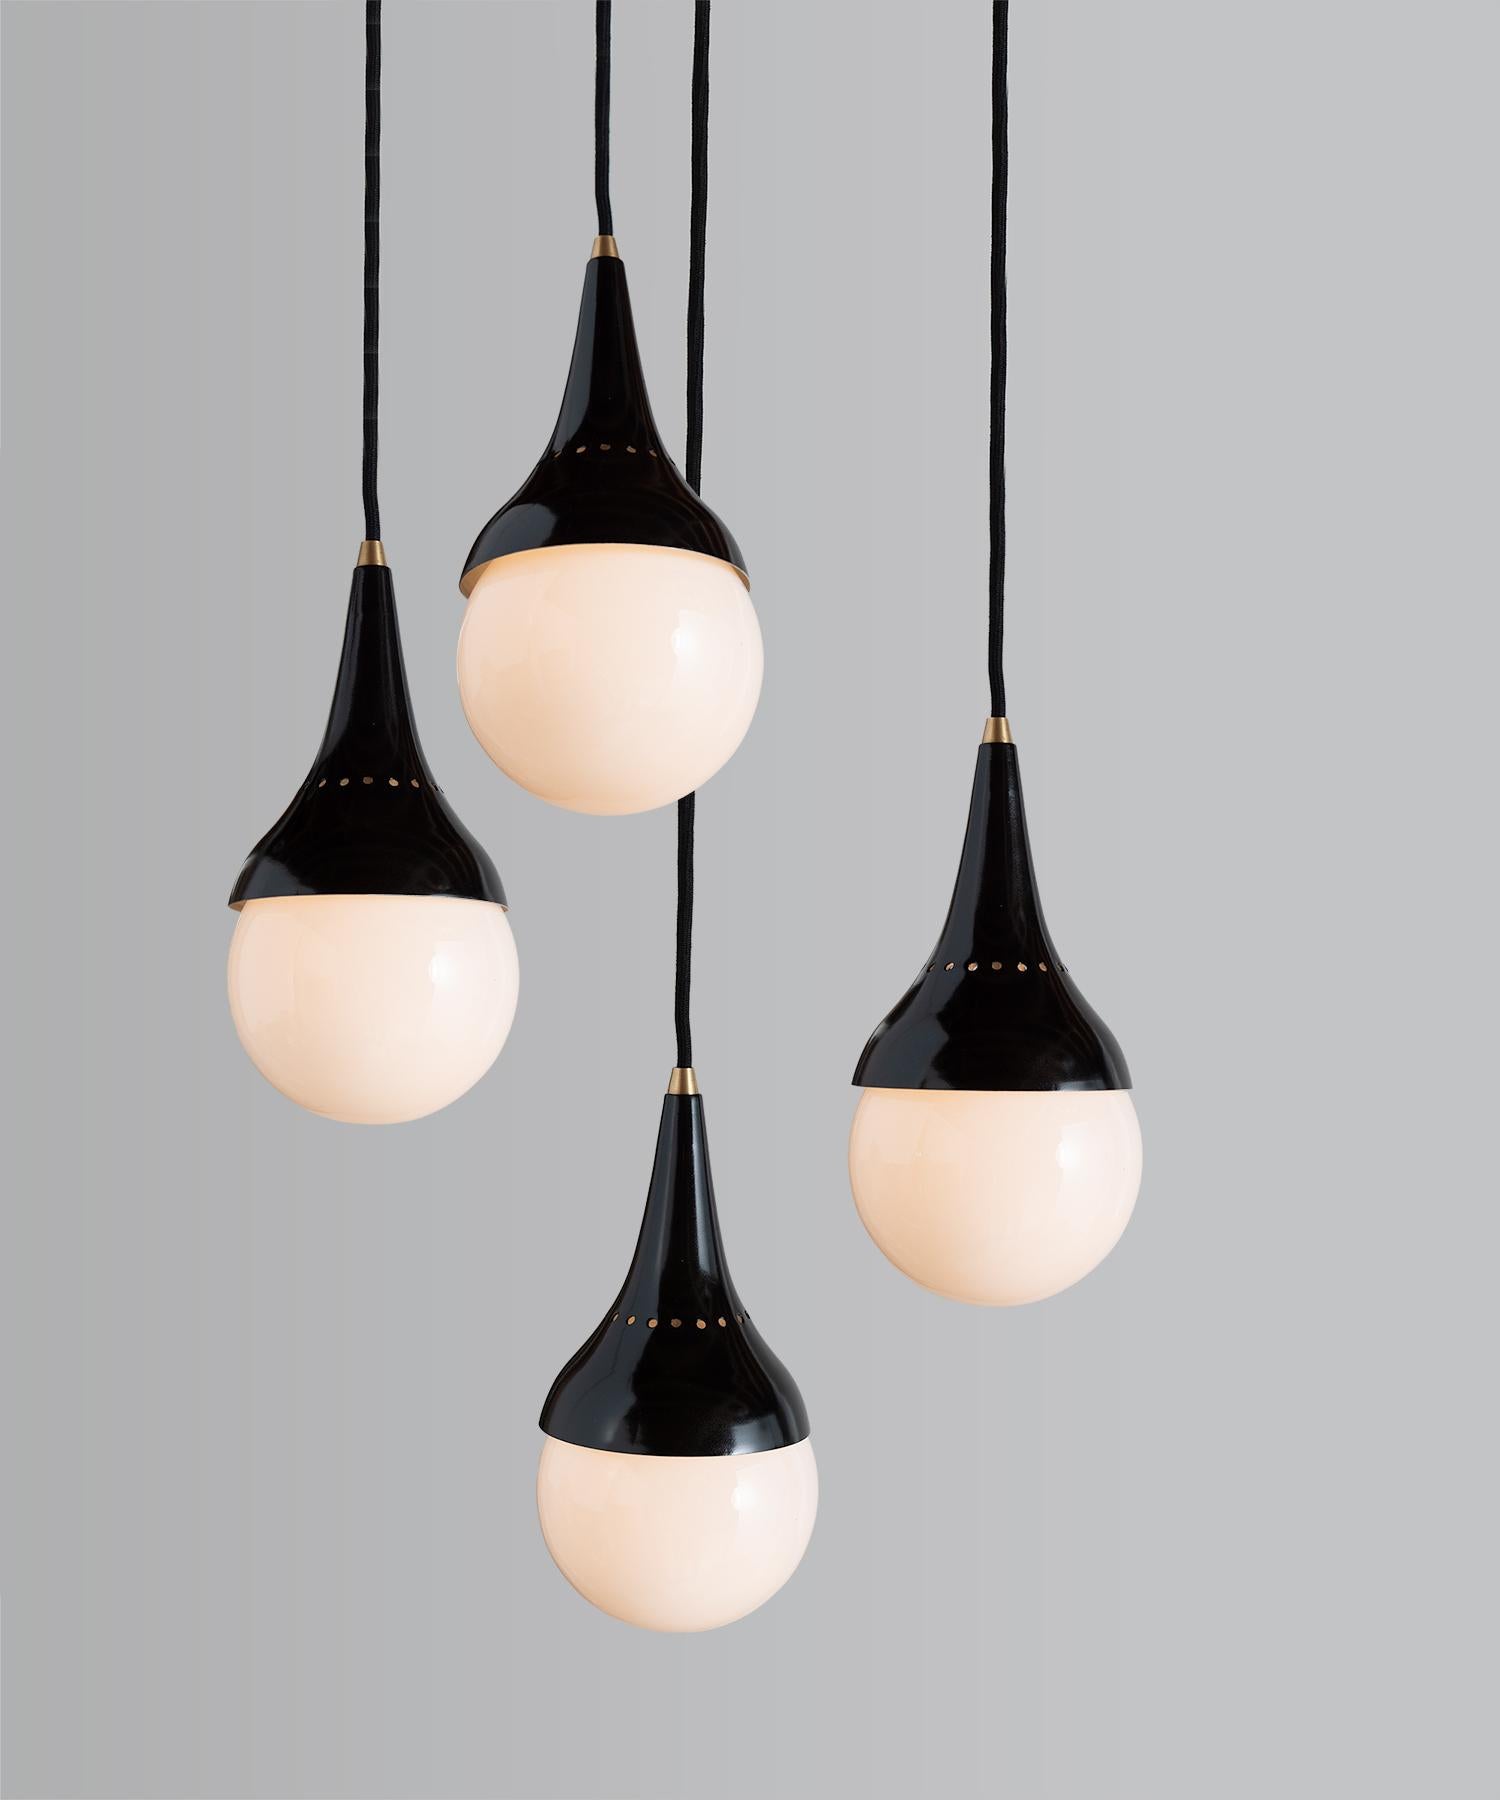 Stilnovo pendants, Italy, 1950.

Opal glass shade with black metal fitter and brass detailing.